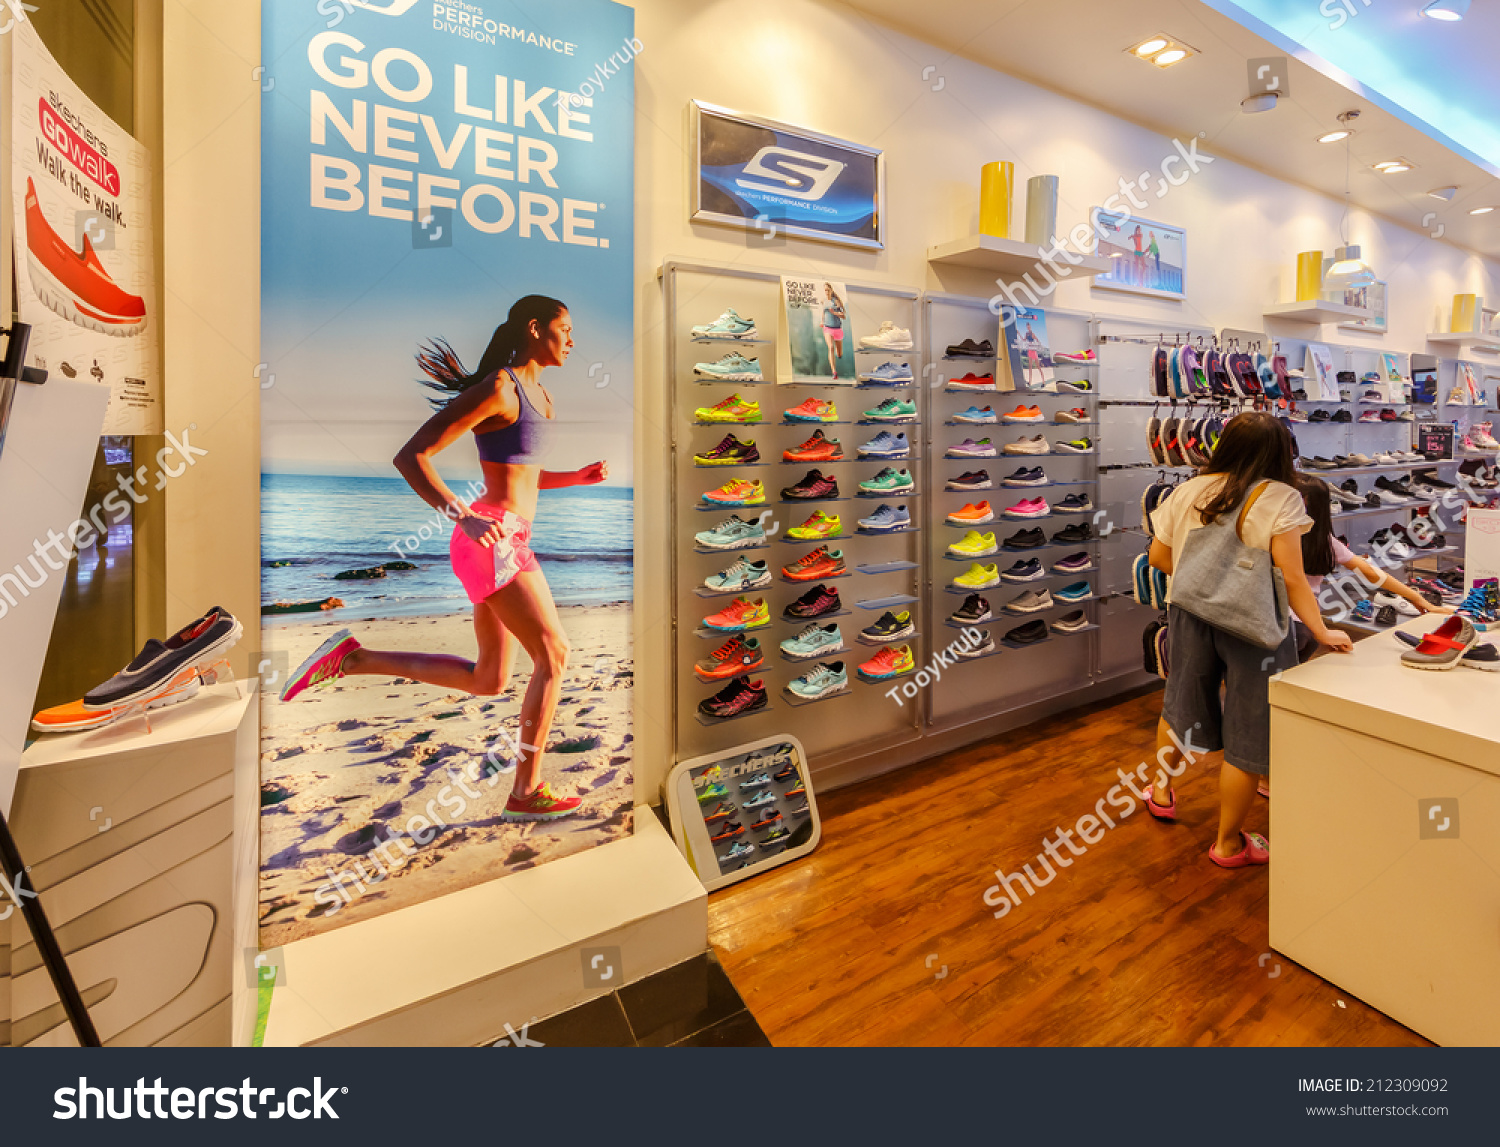 skechers shoes outlet toronto